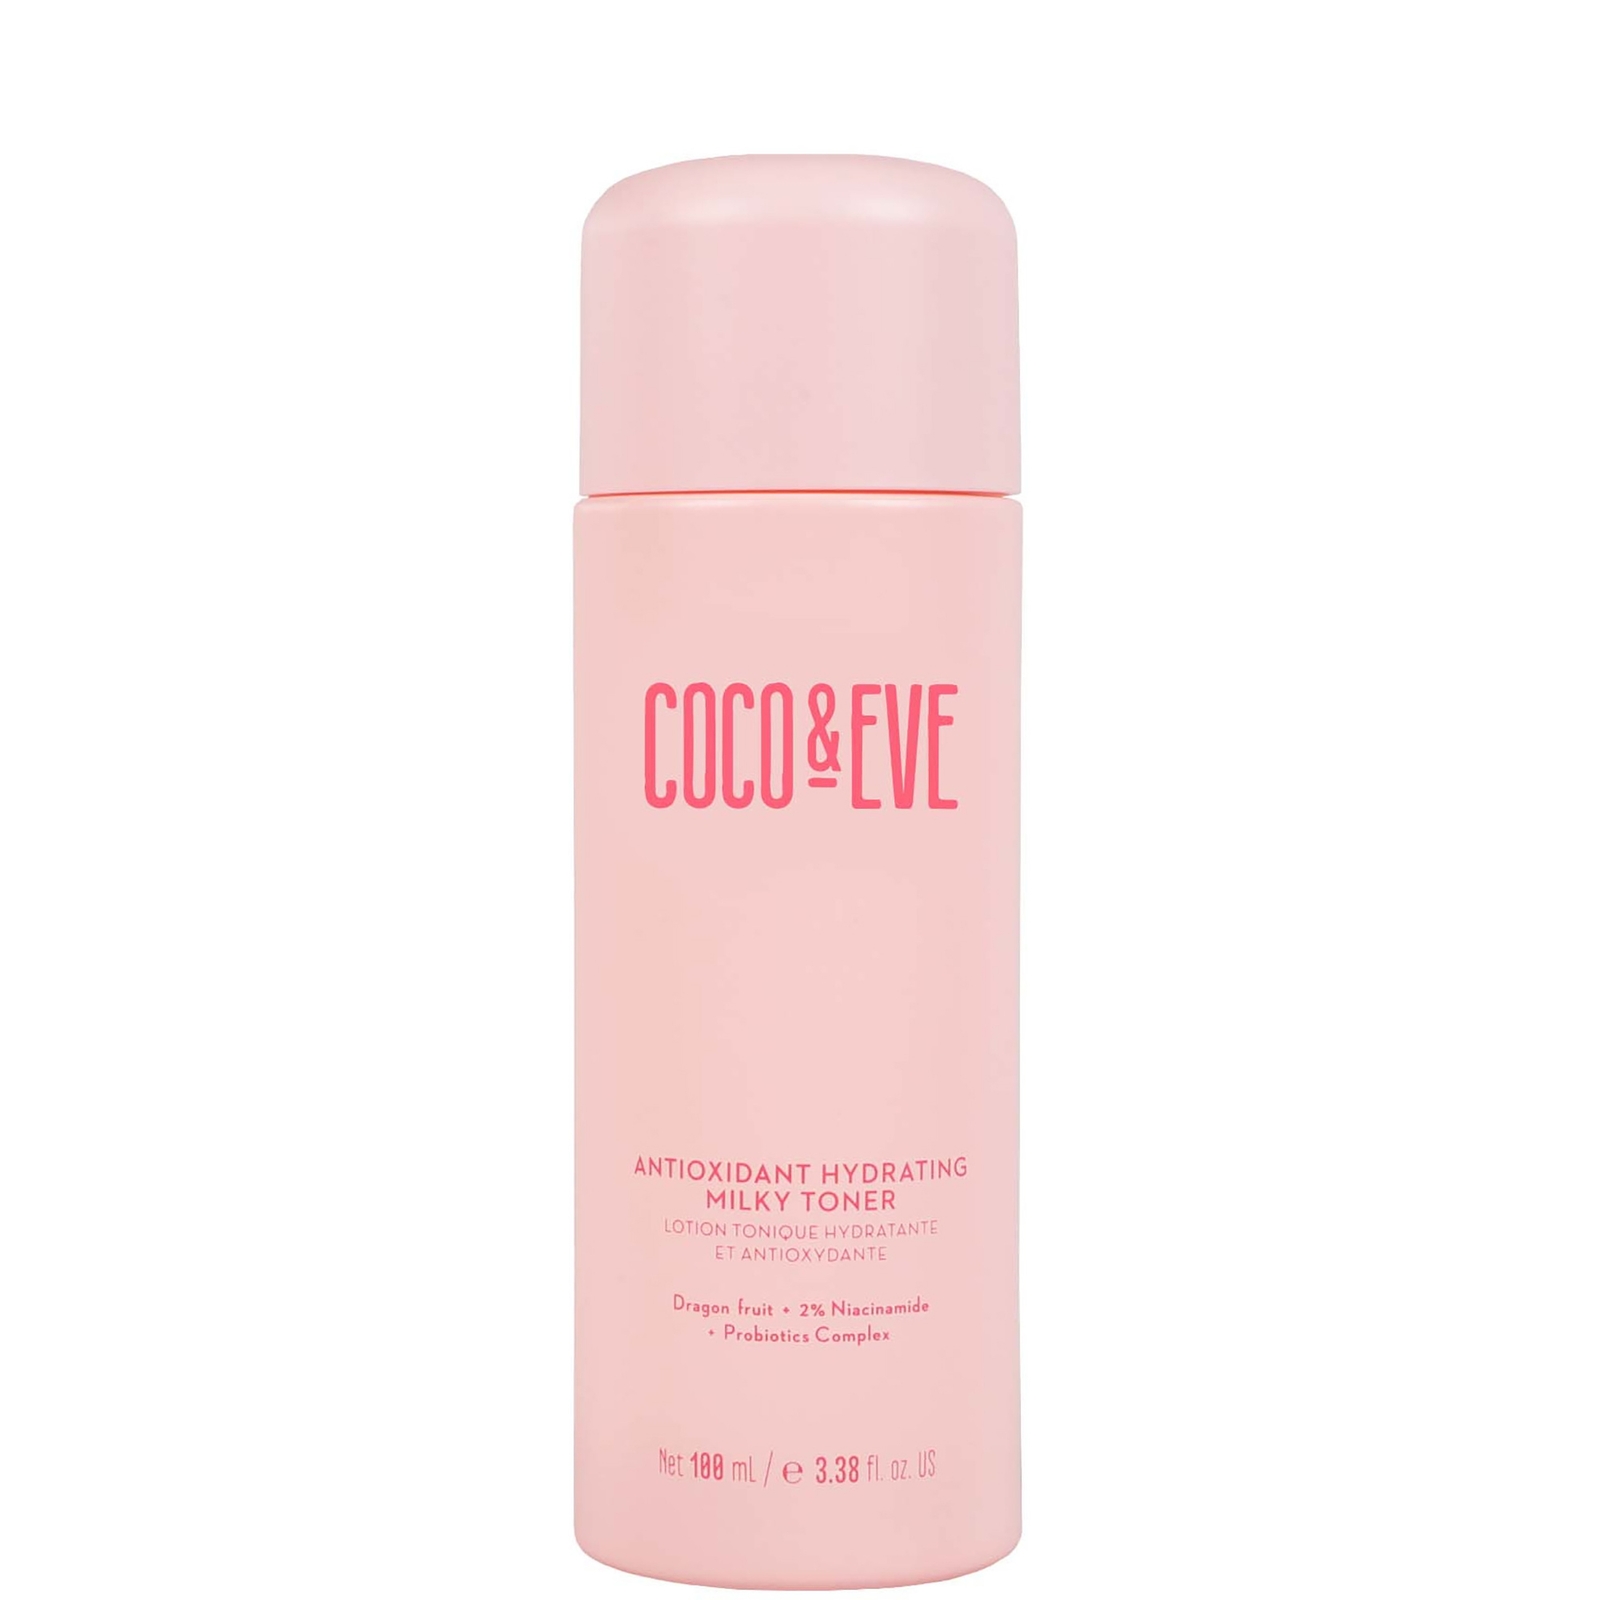 Coco & Eve Antioxidant Hydrating Milky Toner 100ml In Pink